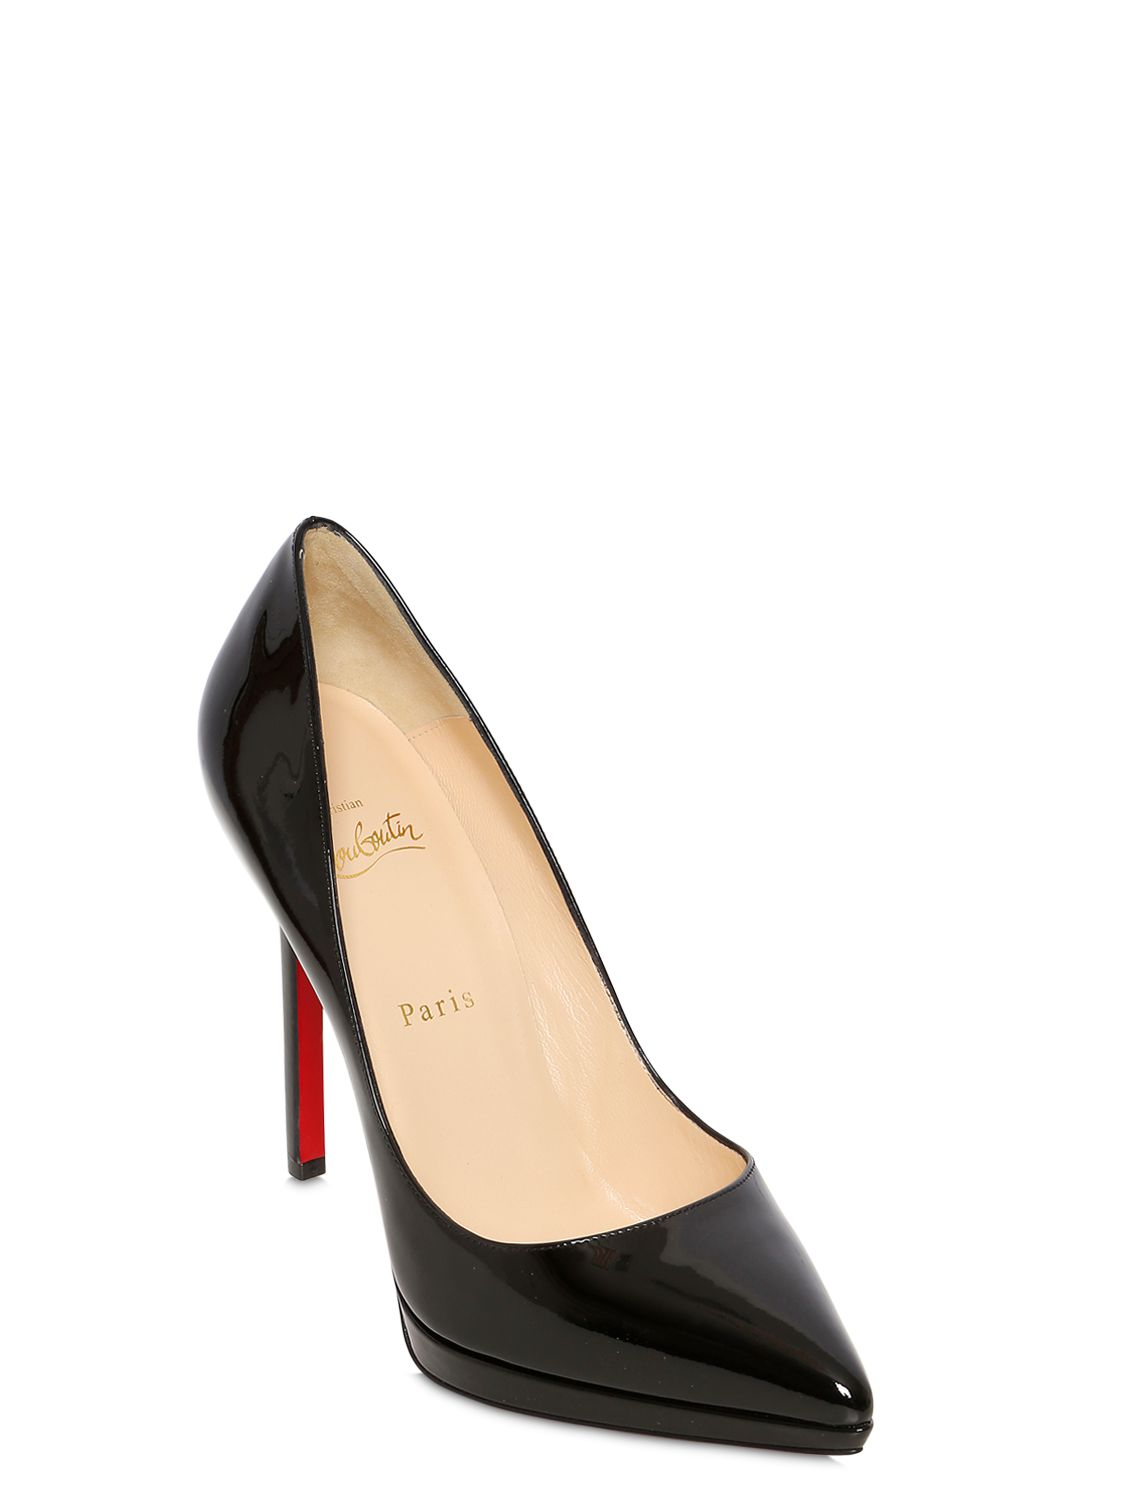 Christian louboutin 120mm Pigalle Plato Patent Leather Pumps in ...  